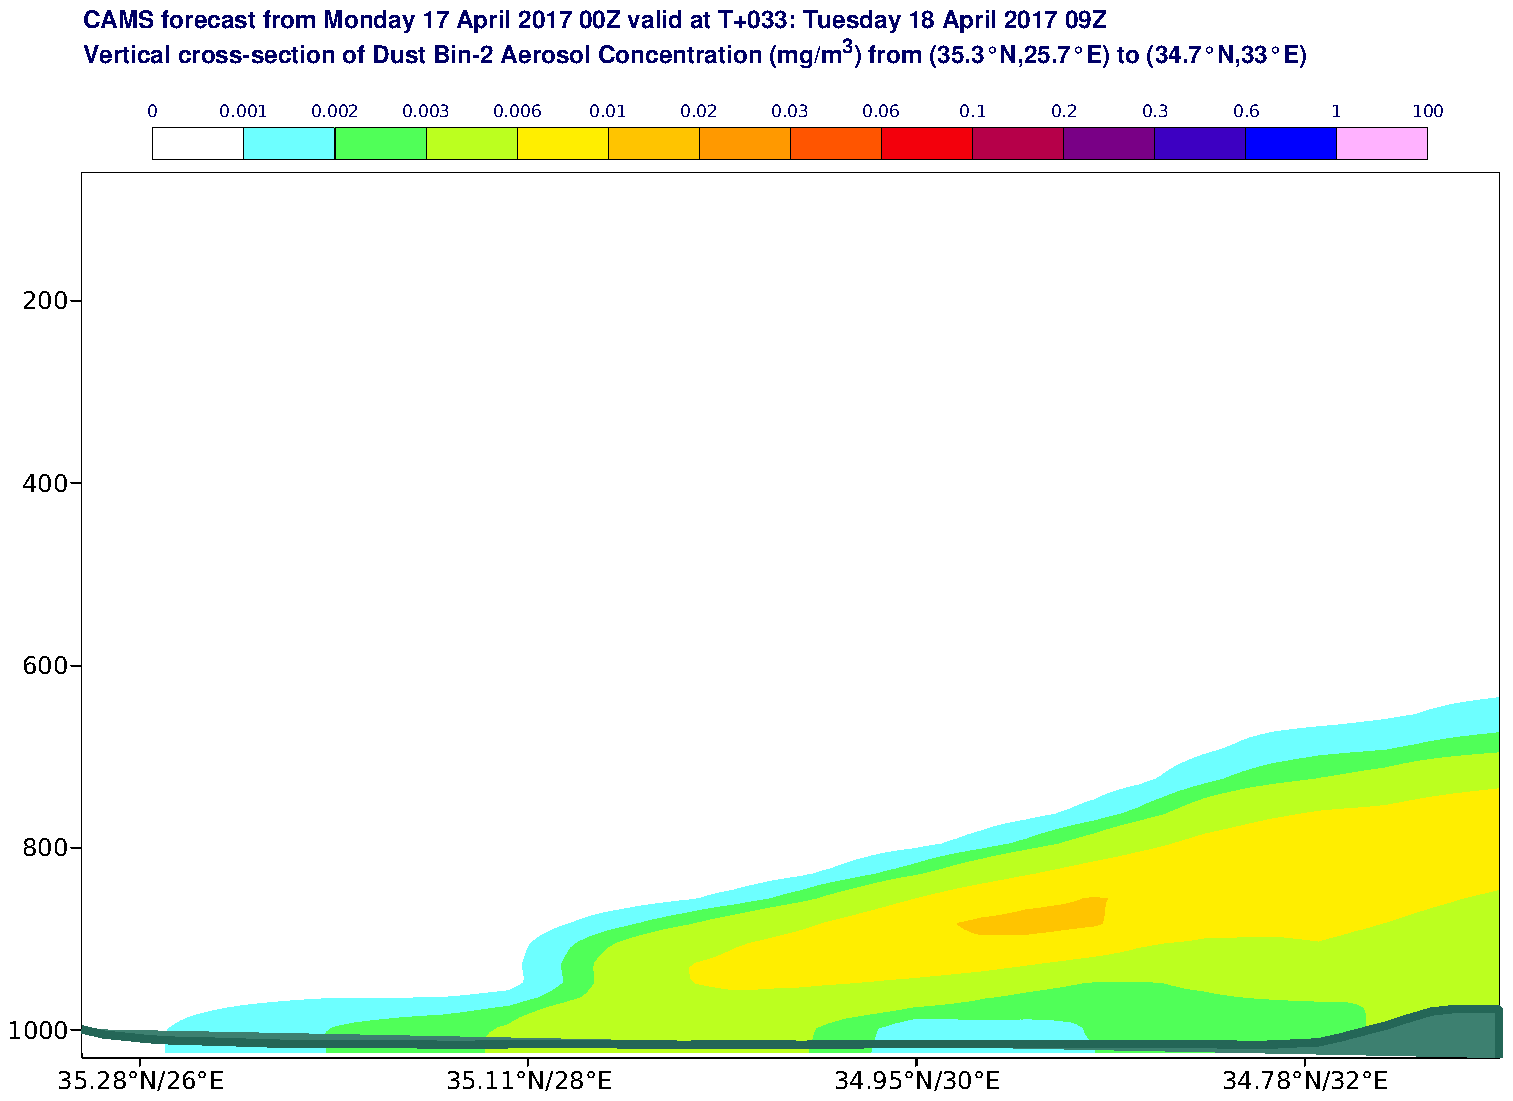 Vertical cross-section of Dust Bin-2 Aerosol Concentration (mg/m3) valid at T33 - 2017-04-18 09:00